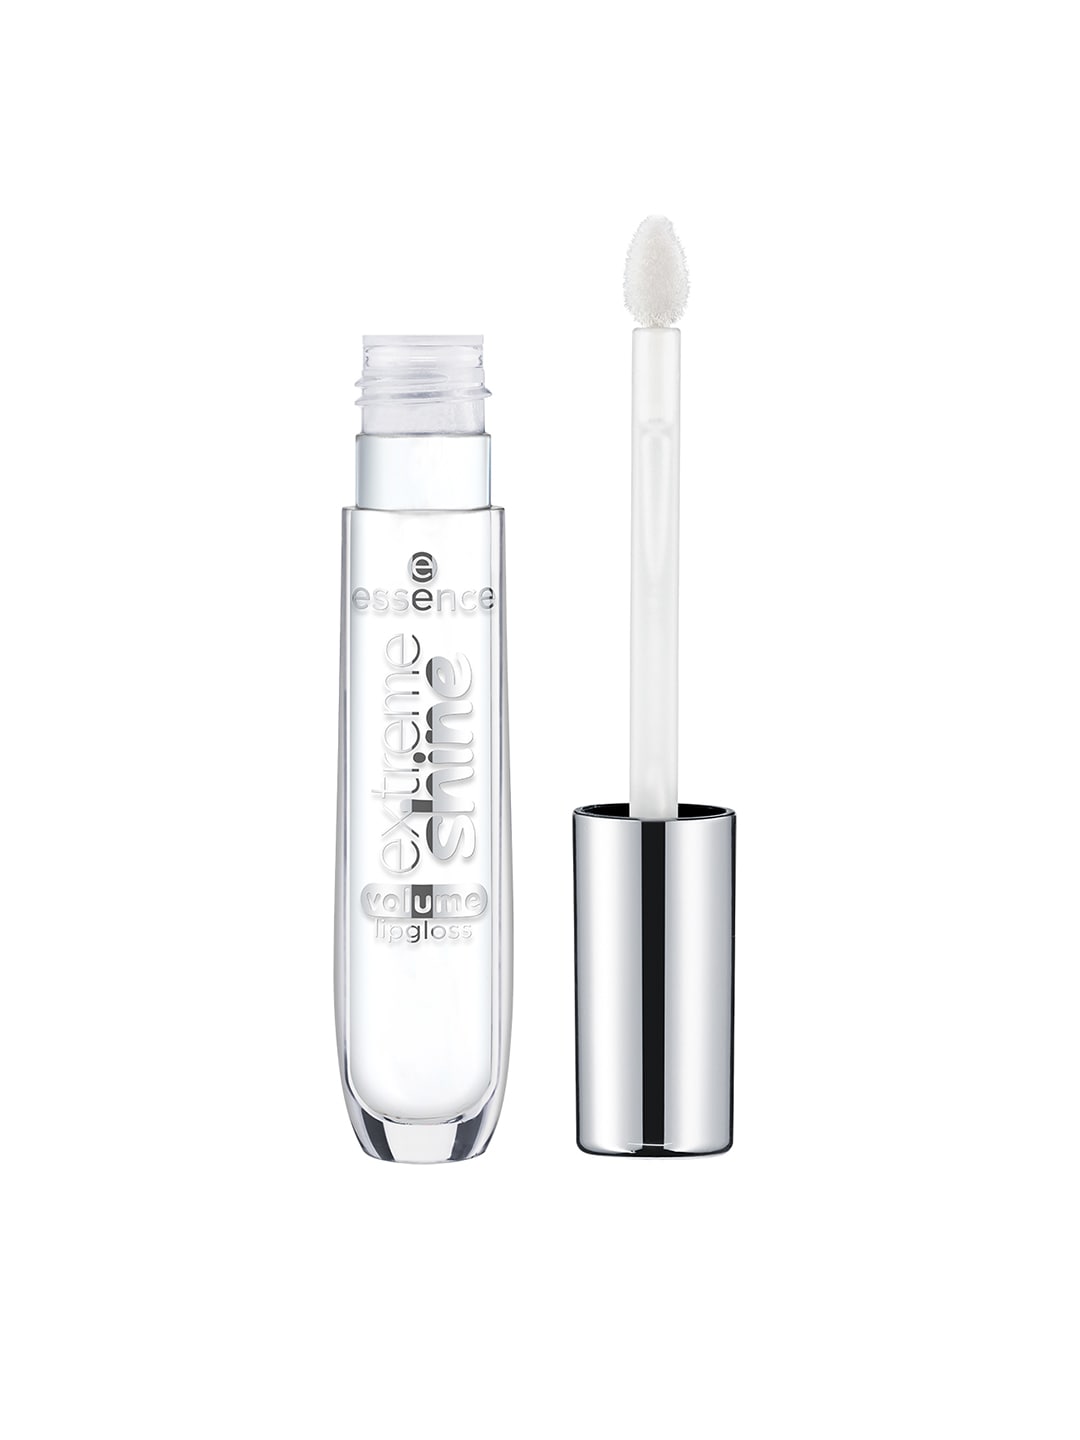 essence Extreme Shine Volume Lipgloss - 01 Crystal Clear Price in India